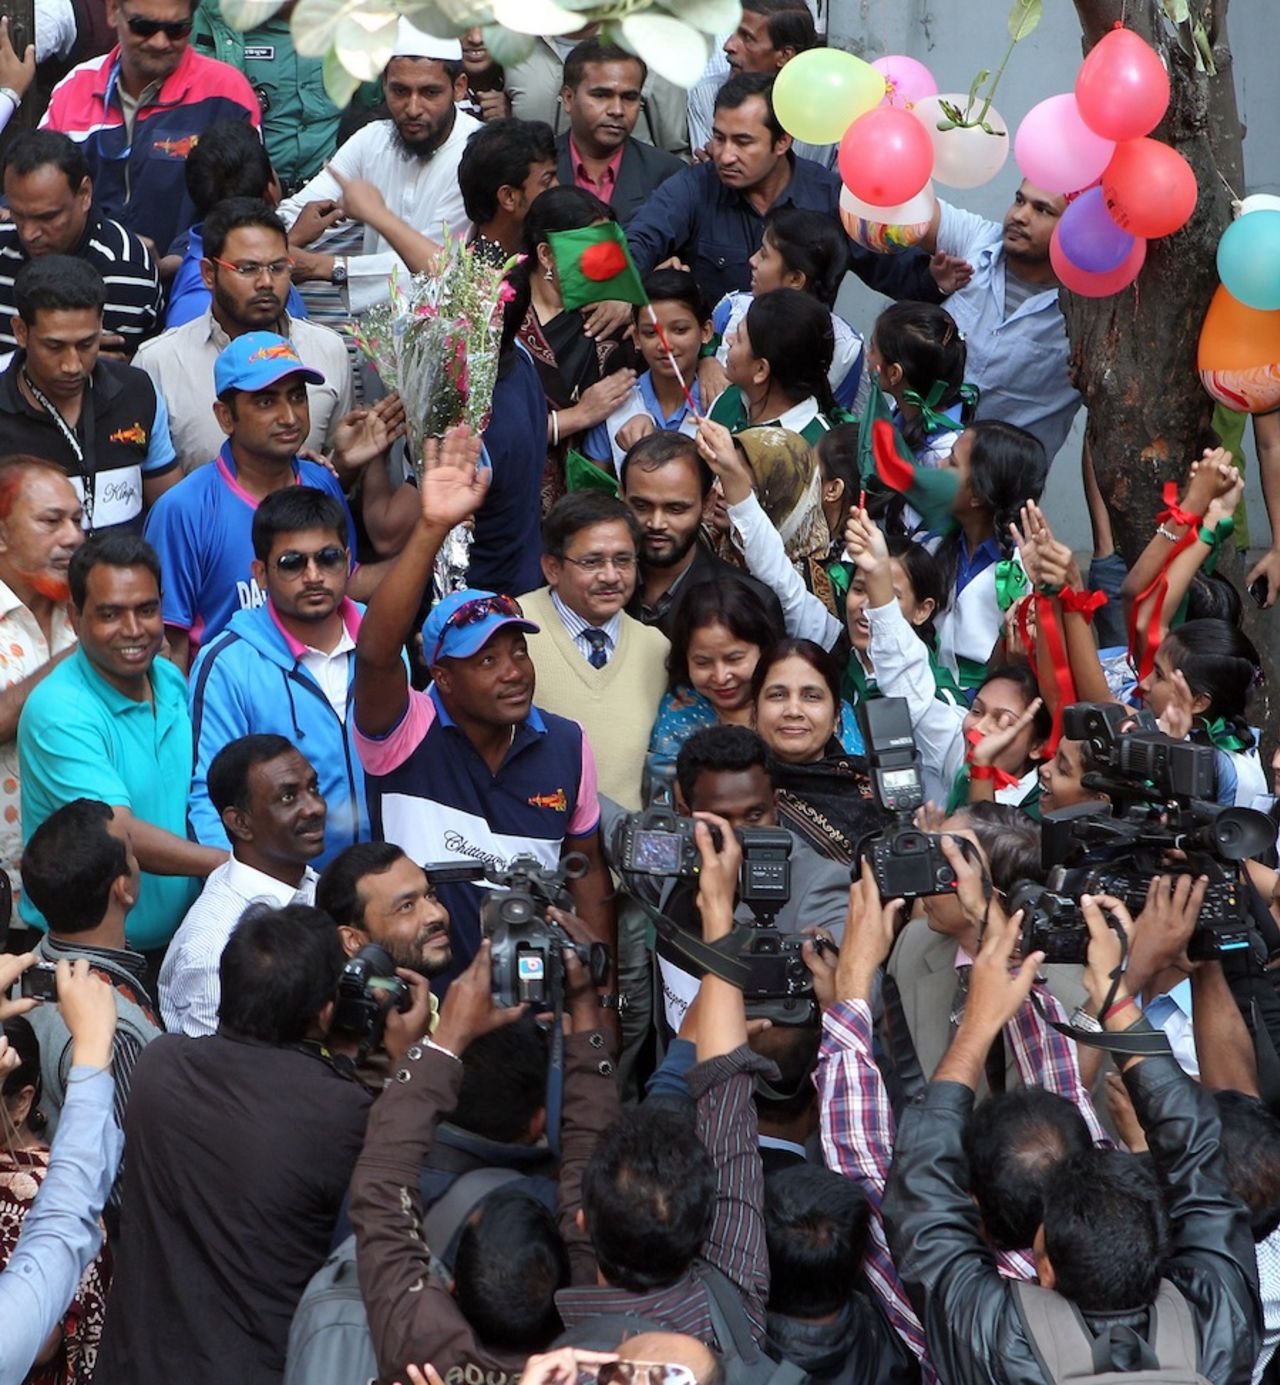 Brian Lara gets mobbed during a visit to a local school, Chittagong, January 29, 2011